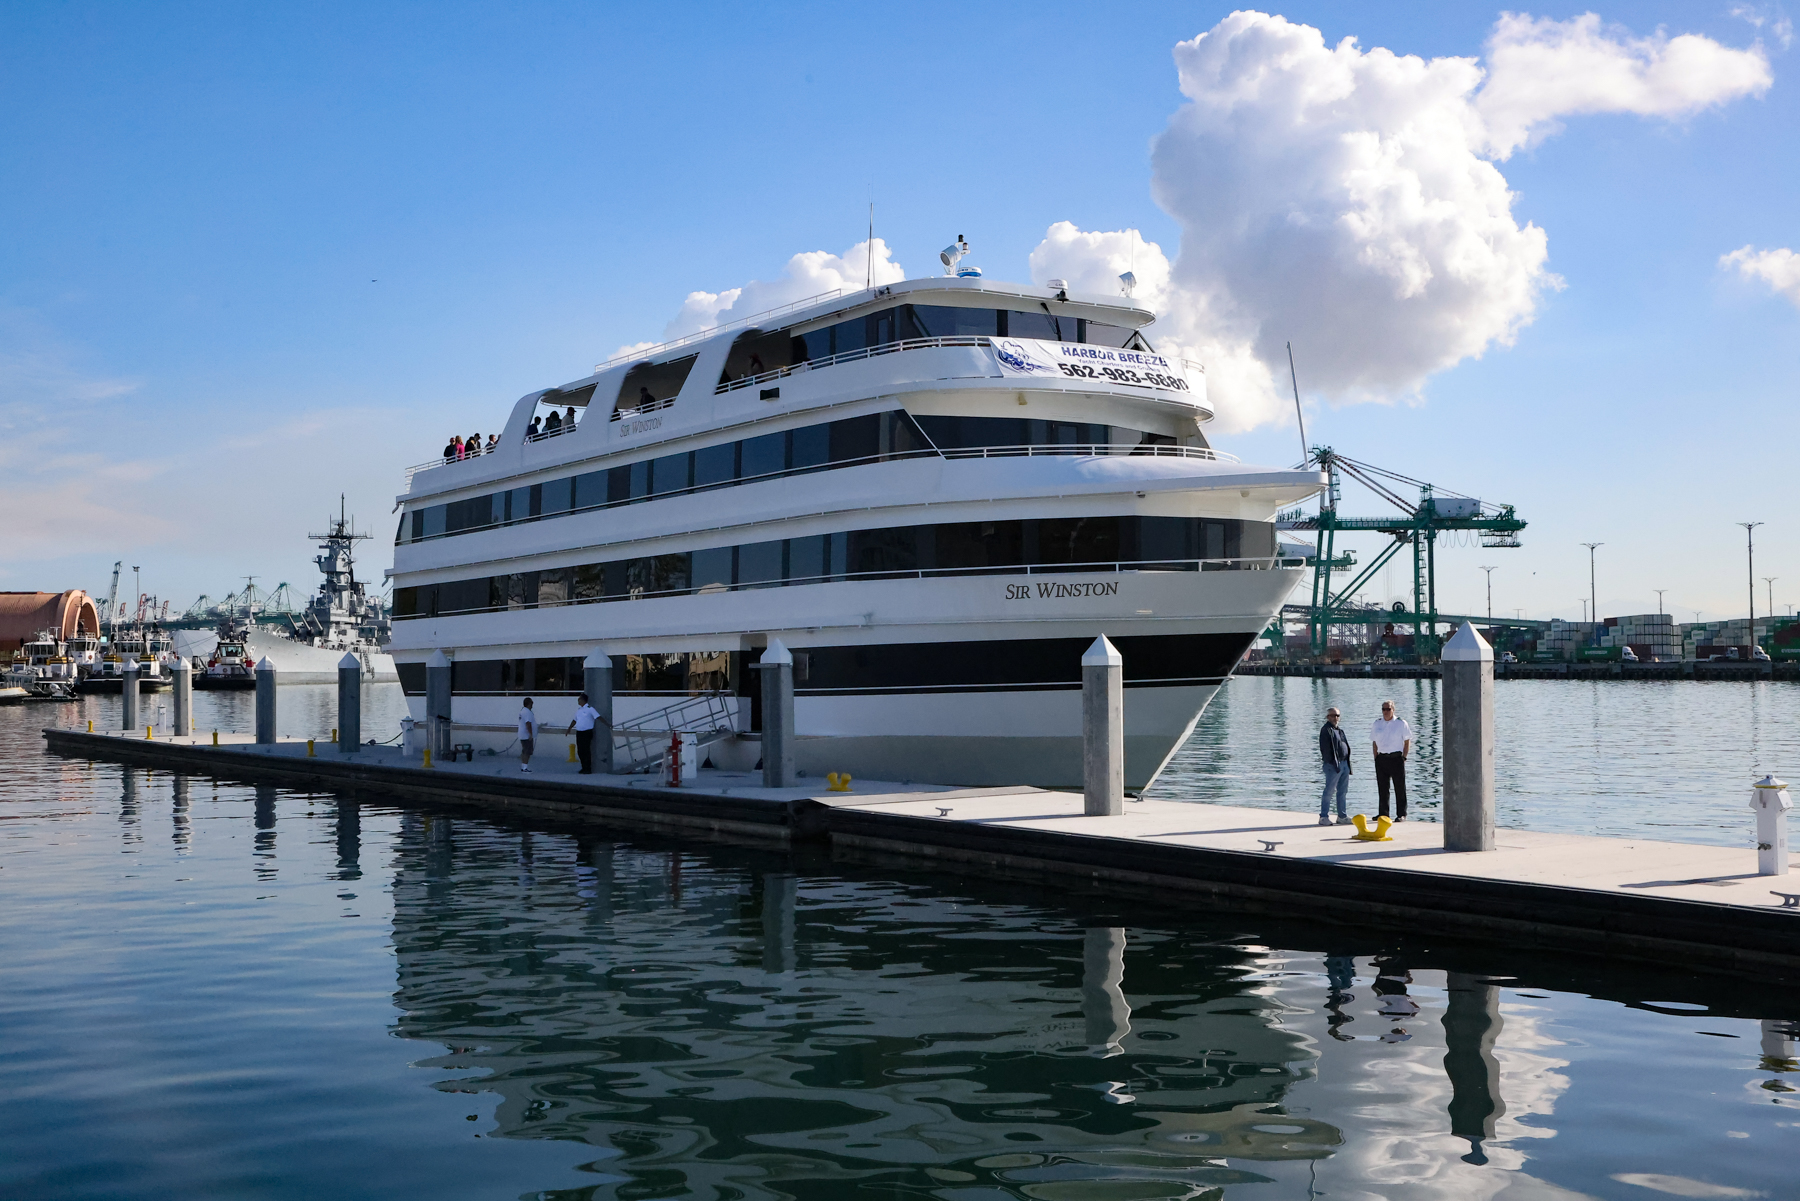 Photo of a large yacht, the Sir Winston, docked